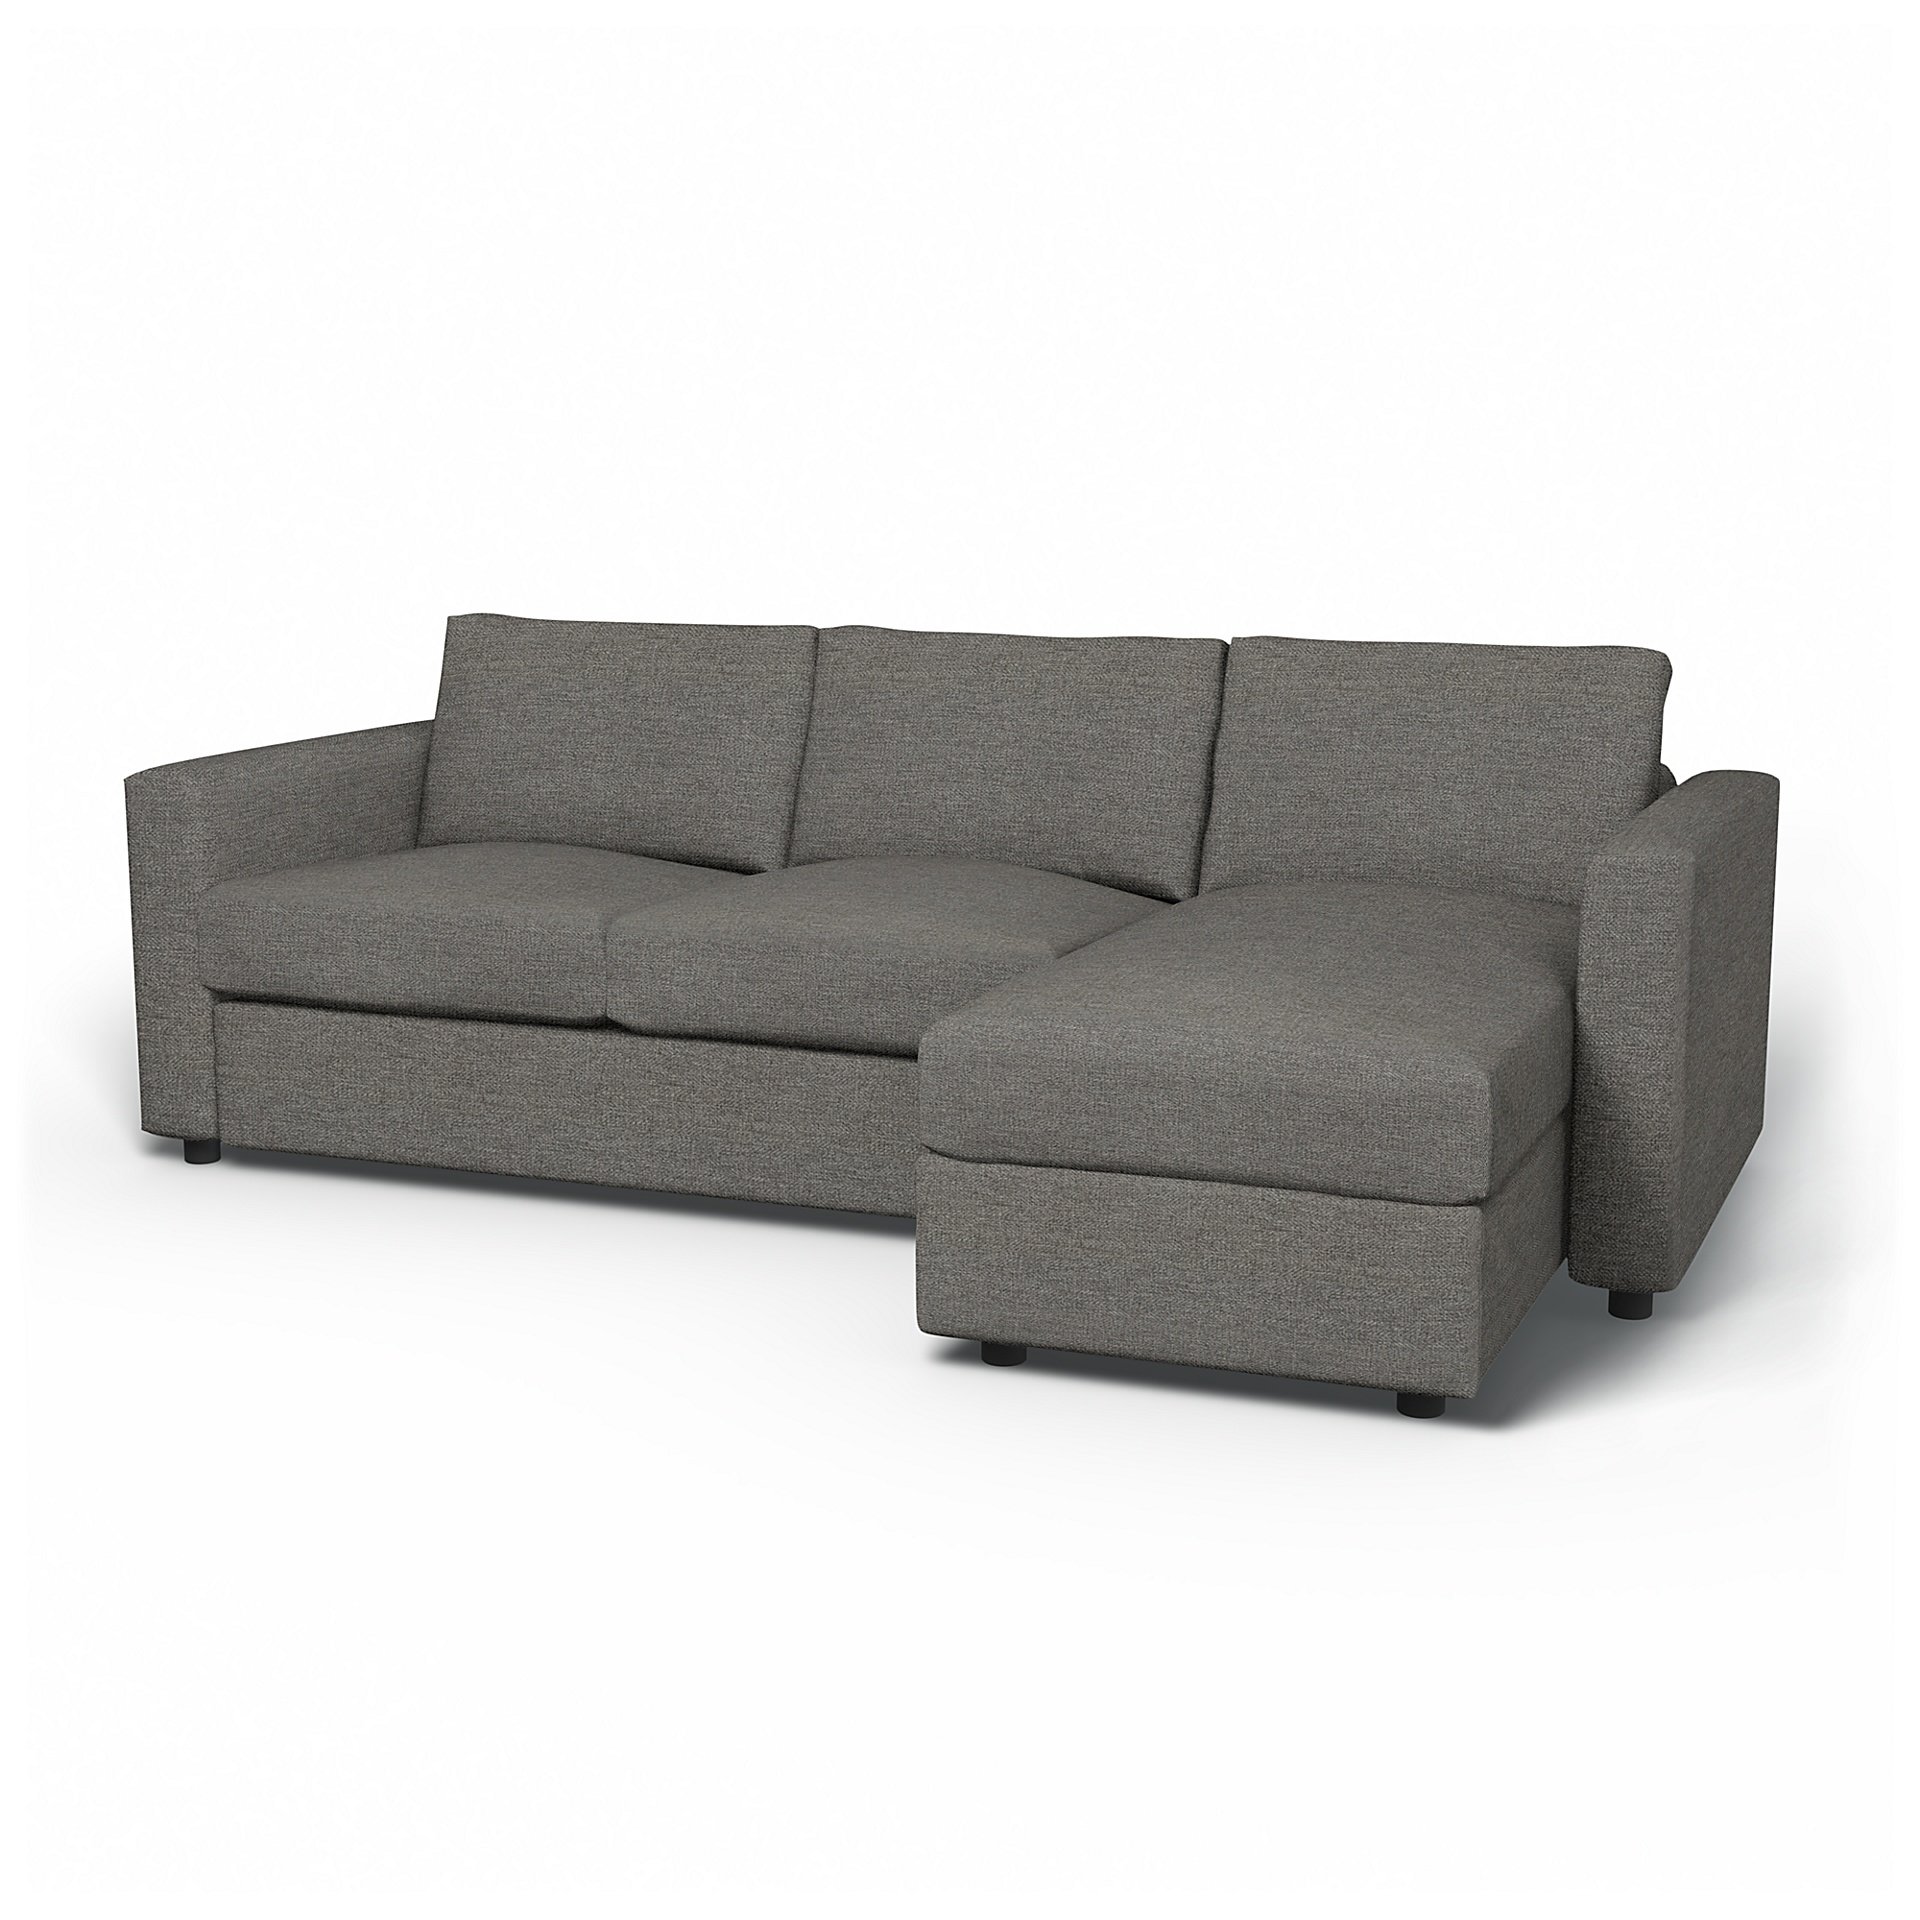 IKEA - Vimle 2 Seater Sofa with Chaise Cover, Taupe, Boucle & Texture - Bemz